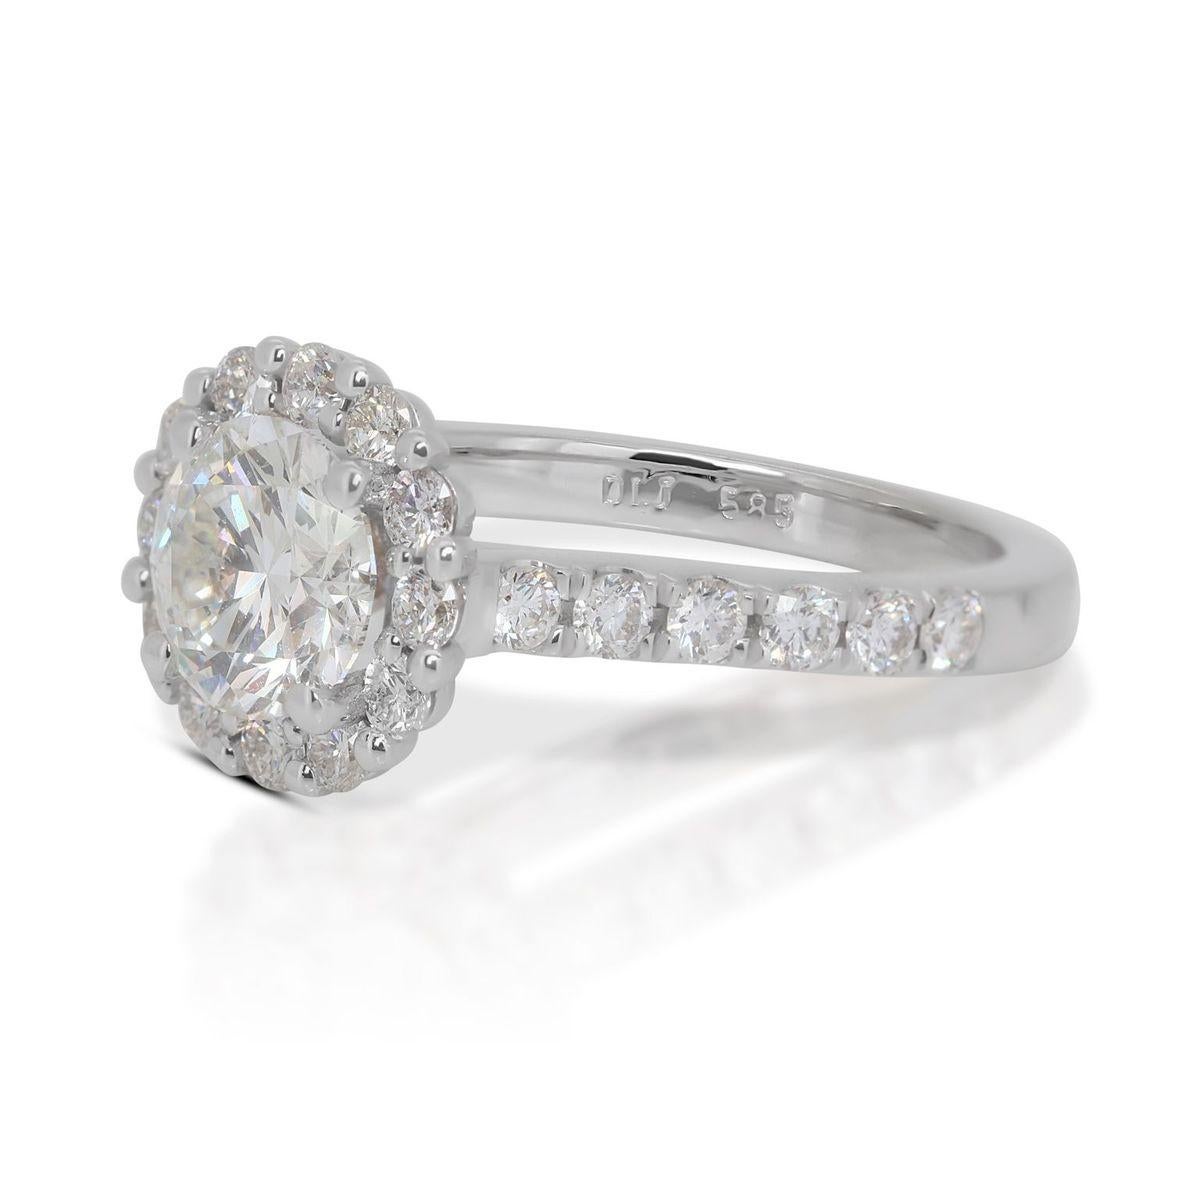 Women's Sophisticated 14k White Gold Halo Ring w/ 1.43 Carat Natural Diamonds